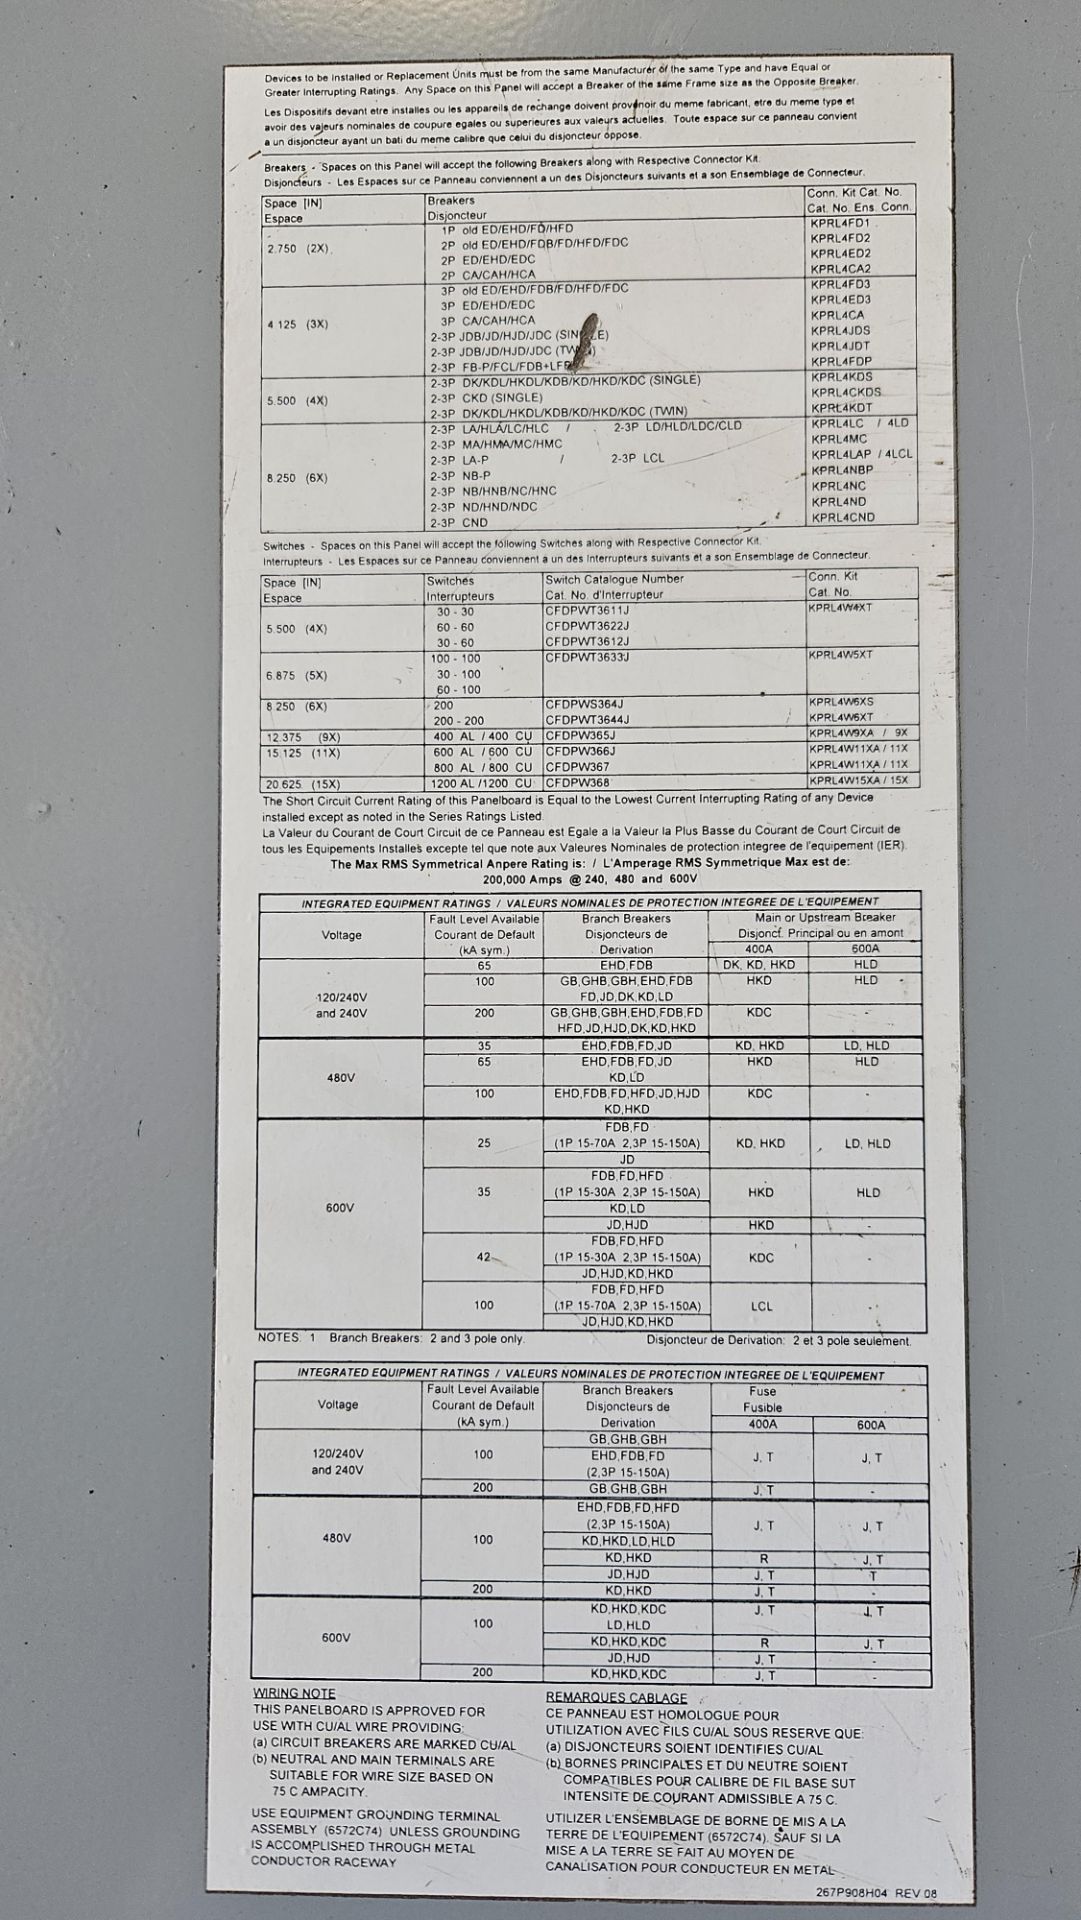 CUTLER HAMMER POW-R-LINE C PANEL BOARD, 480 VOLT, 3-PHASE - (LOCATION - 164 INDUSTRIAL BLVD, ST. - Image 3 of 3